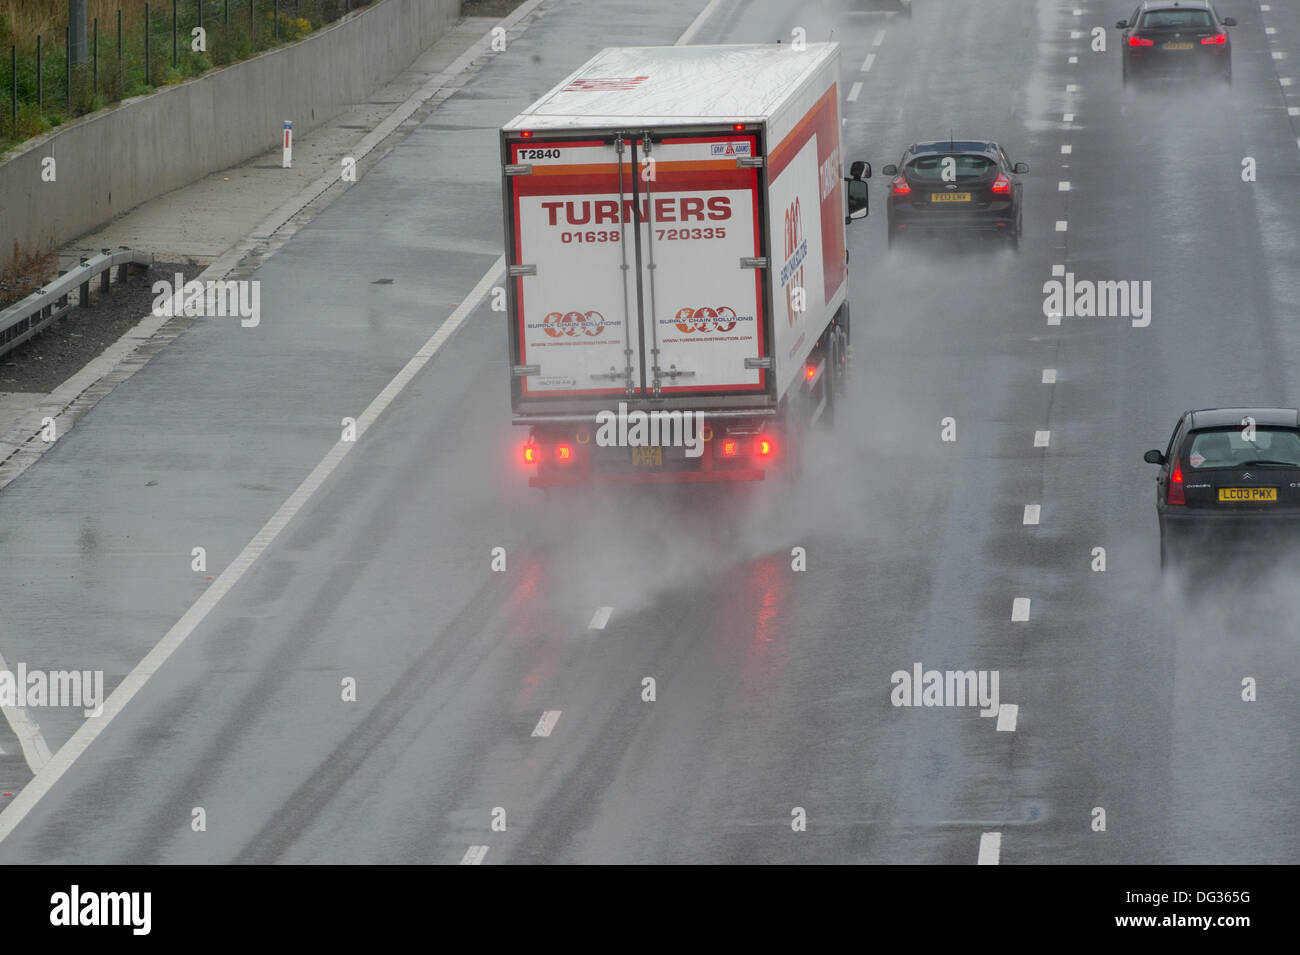 13th October 2013. M25 Essex. Heavy rain causes hazardous driving conditions for traffic passing through Essex on the M25. Surface water and spray reducing visibility makes for difficult driving. Stock Photo